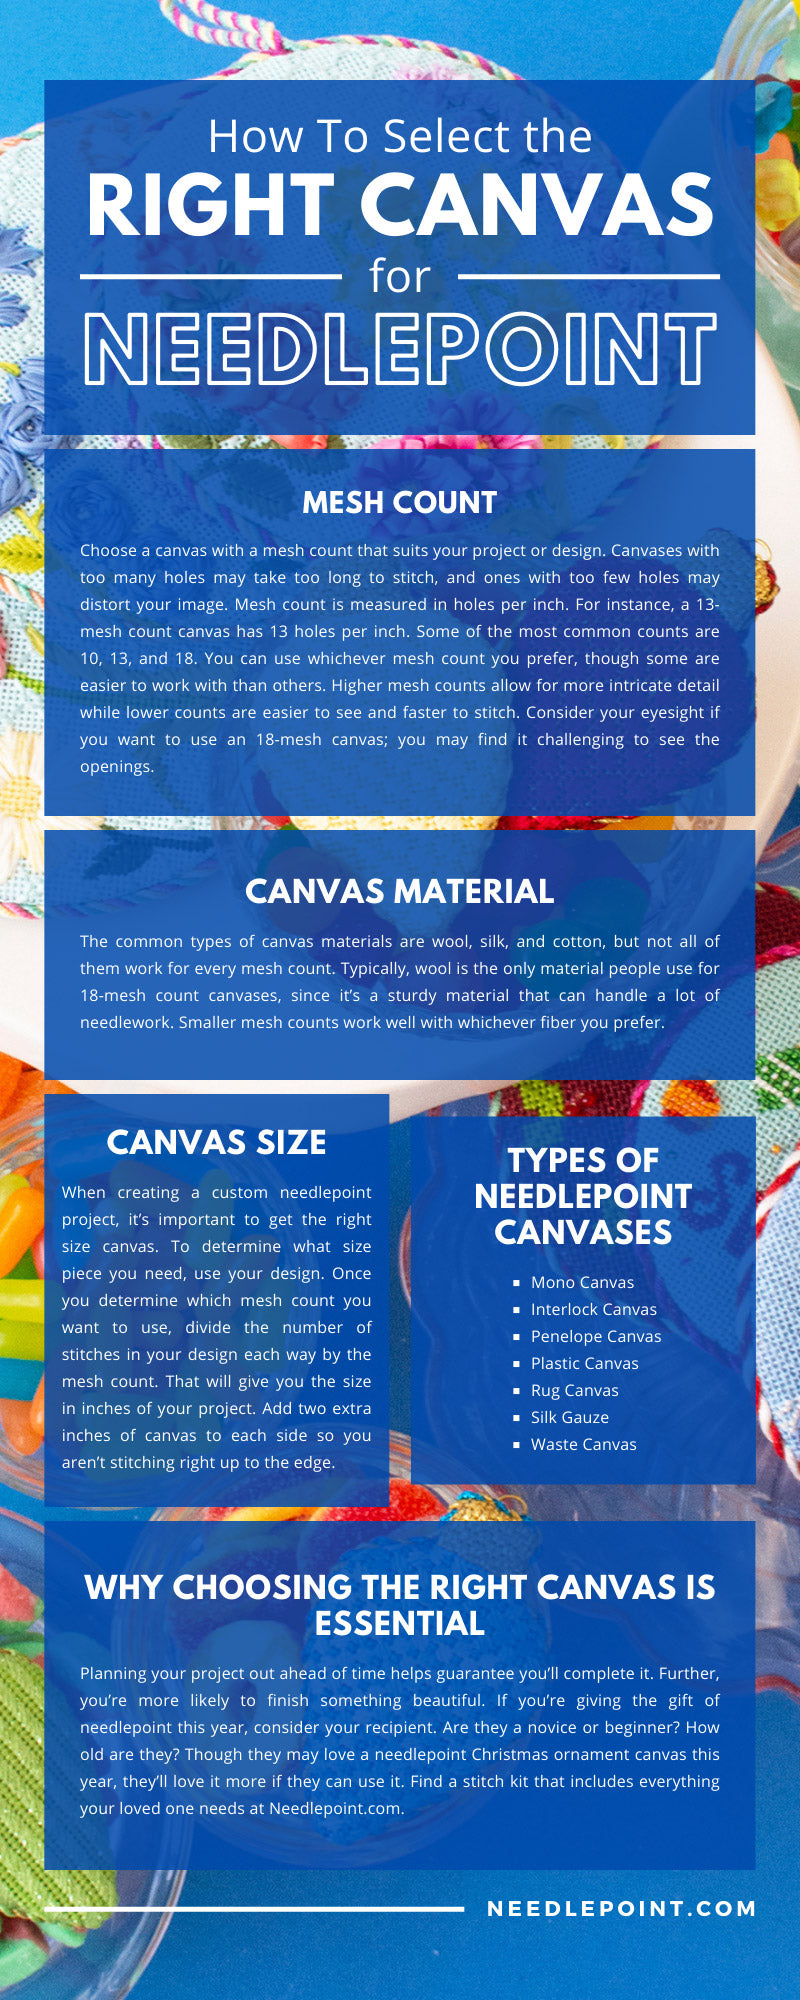 How To Select the Right Canvas for Needlepoint